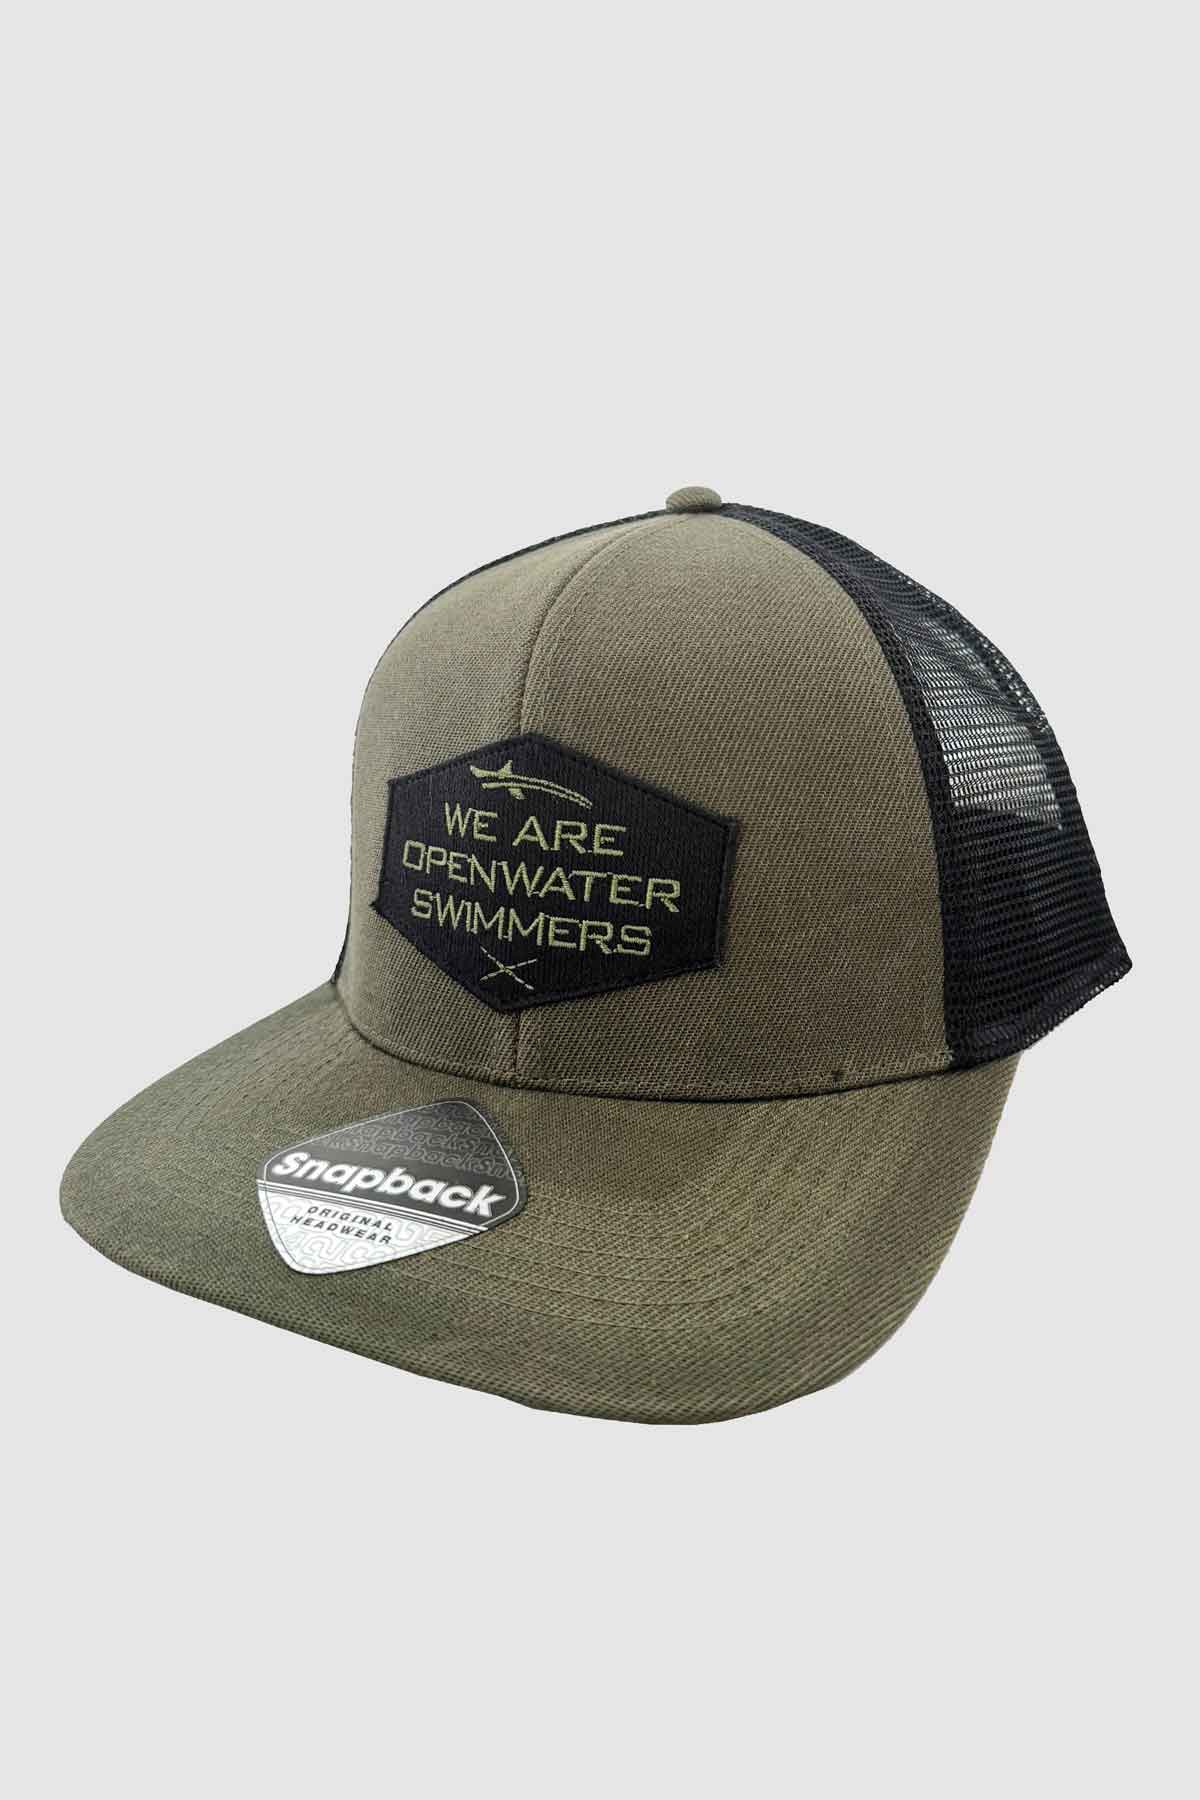 We are open water swimmers olive cap